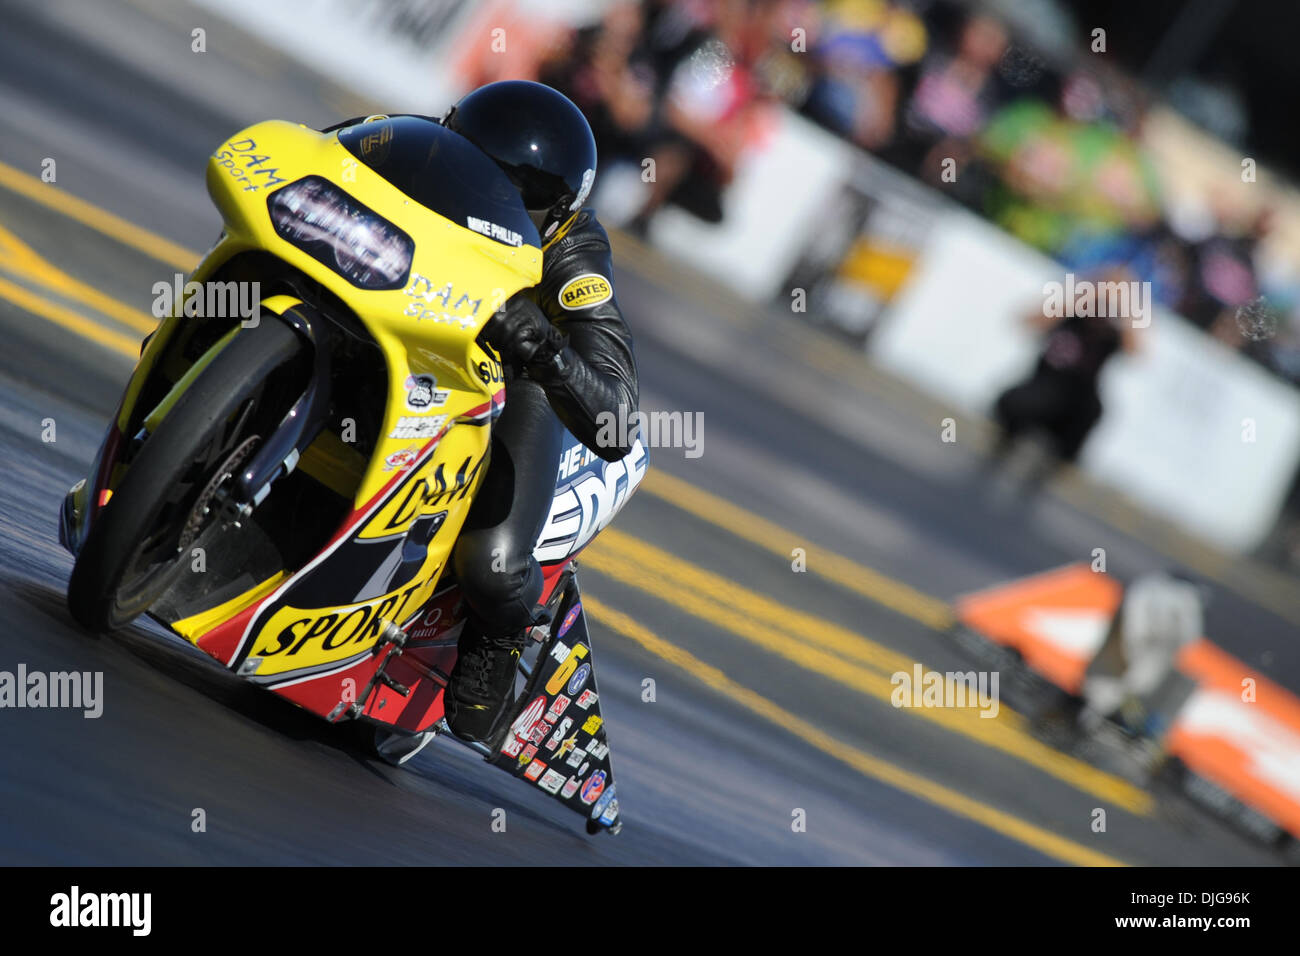 July 16, 2010 - Sonoma, California, United States of America - 16 July 2010: Michael Phillips of Baton Rouge, LA competes in the Pro Stock Motorcycle class at the FRAM Autolite NHRA Nationals at Infineon Raceway, Sonoma, CA.Mandatory Credit: Matt Cohen / Southcreek Global (Credit Image: © Southcreek Global/ZUMApress.com) Stock Photo